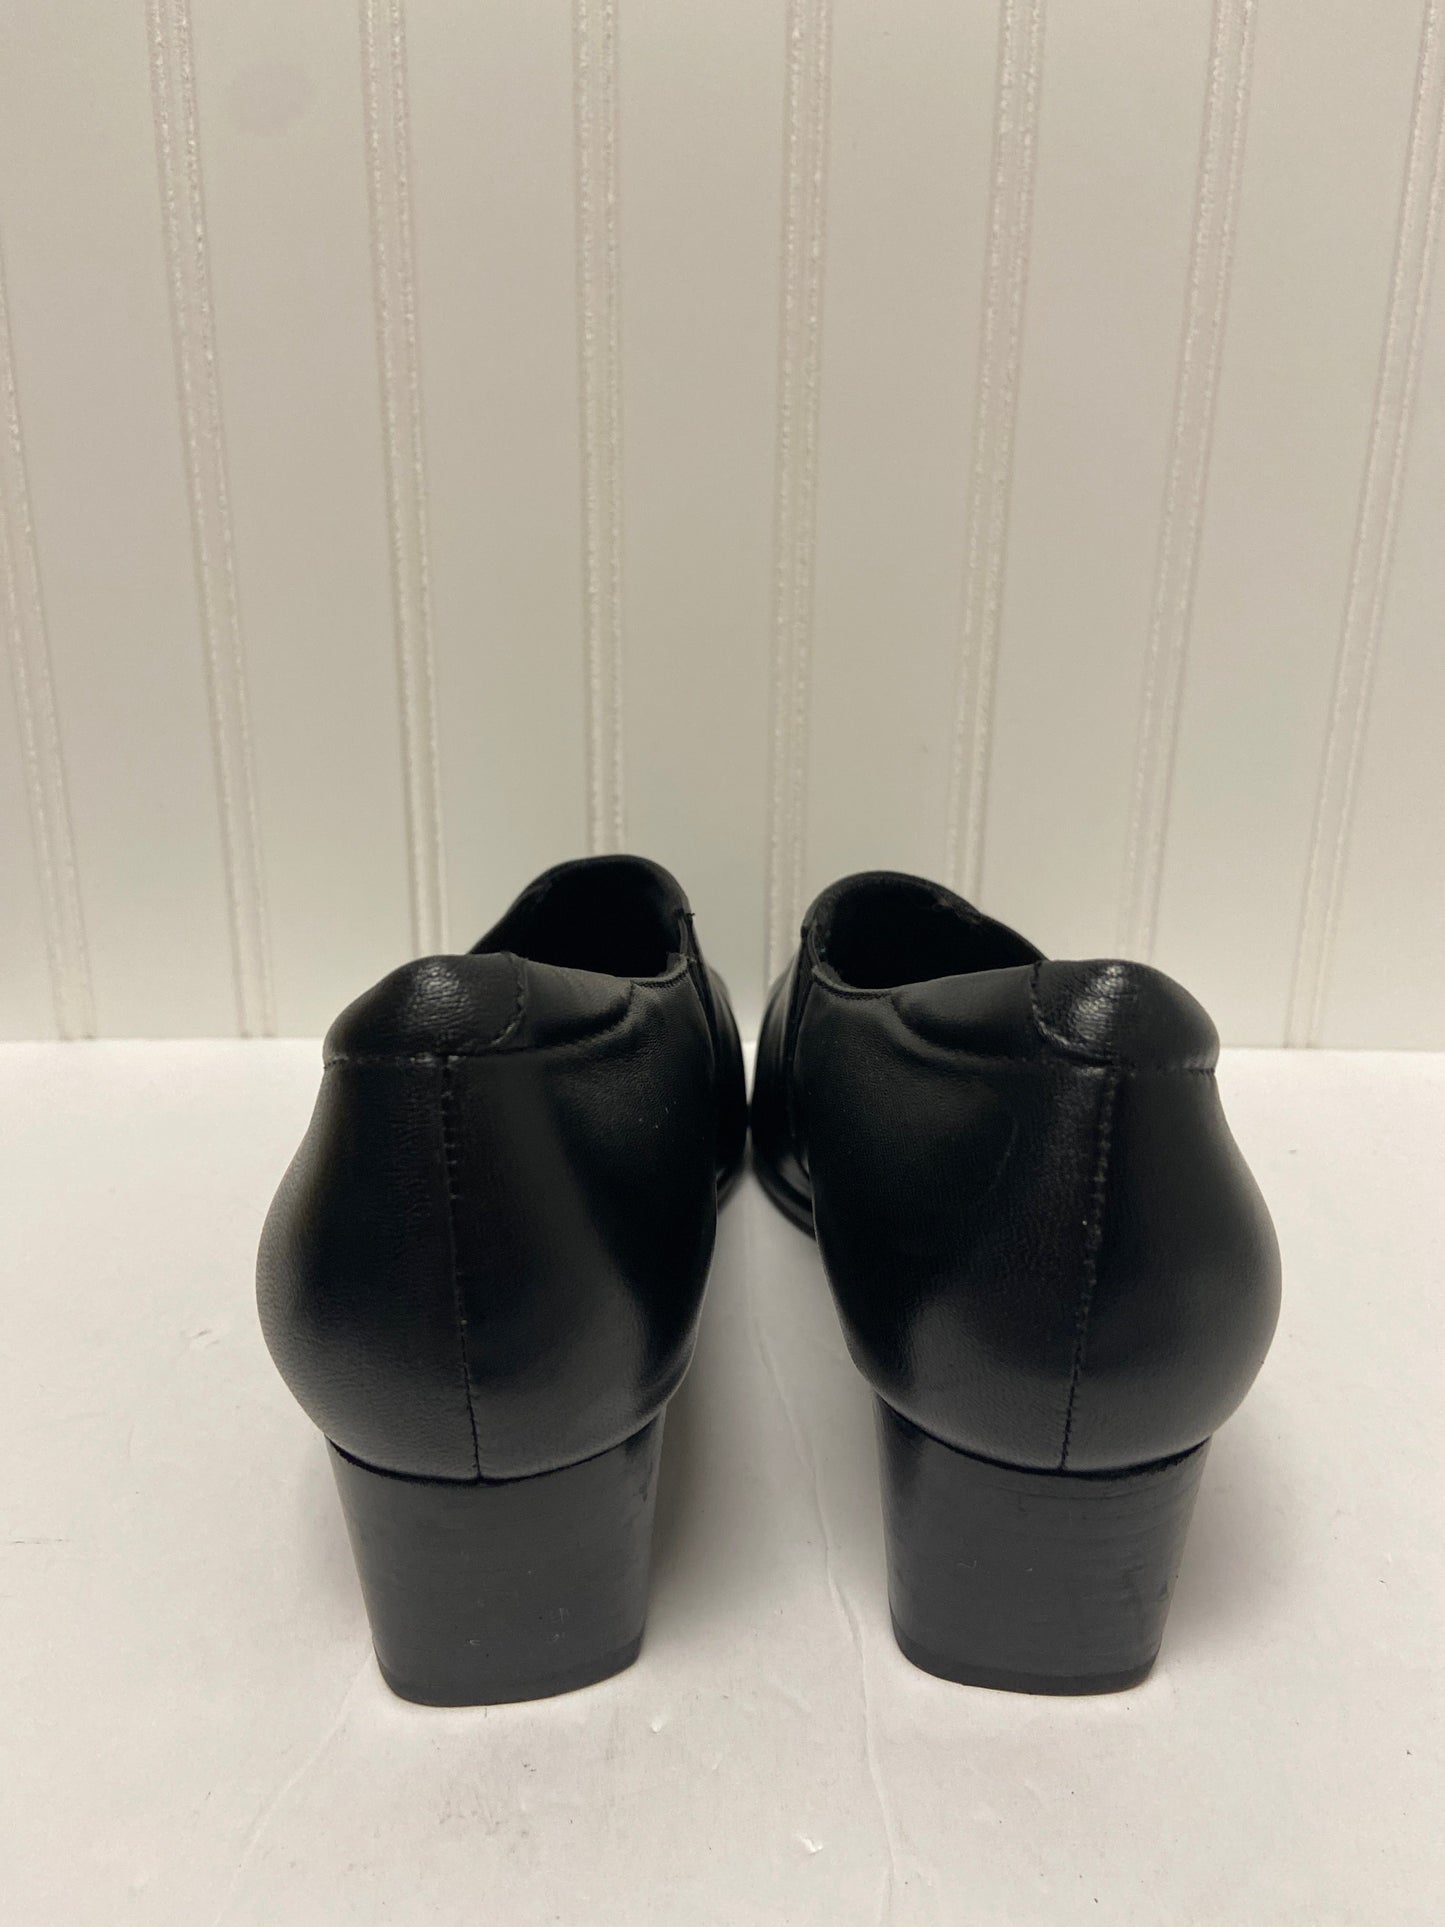 Shoes Heels Block By Clarks  Size: 7.5